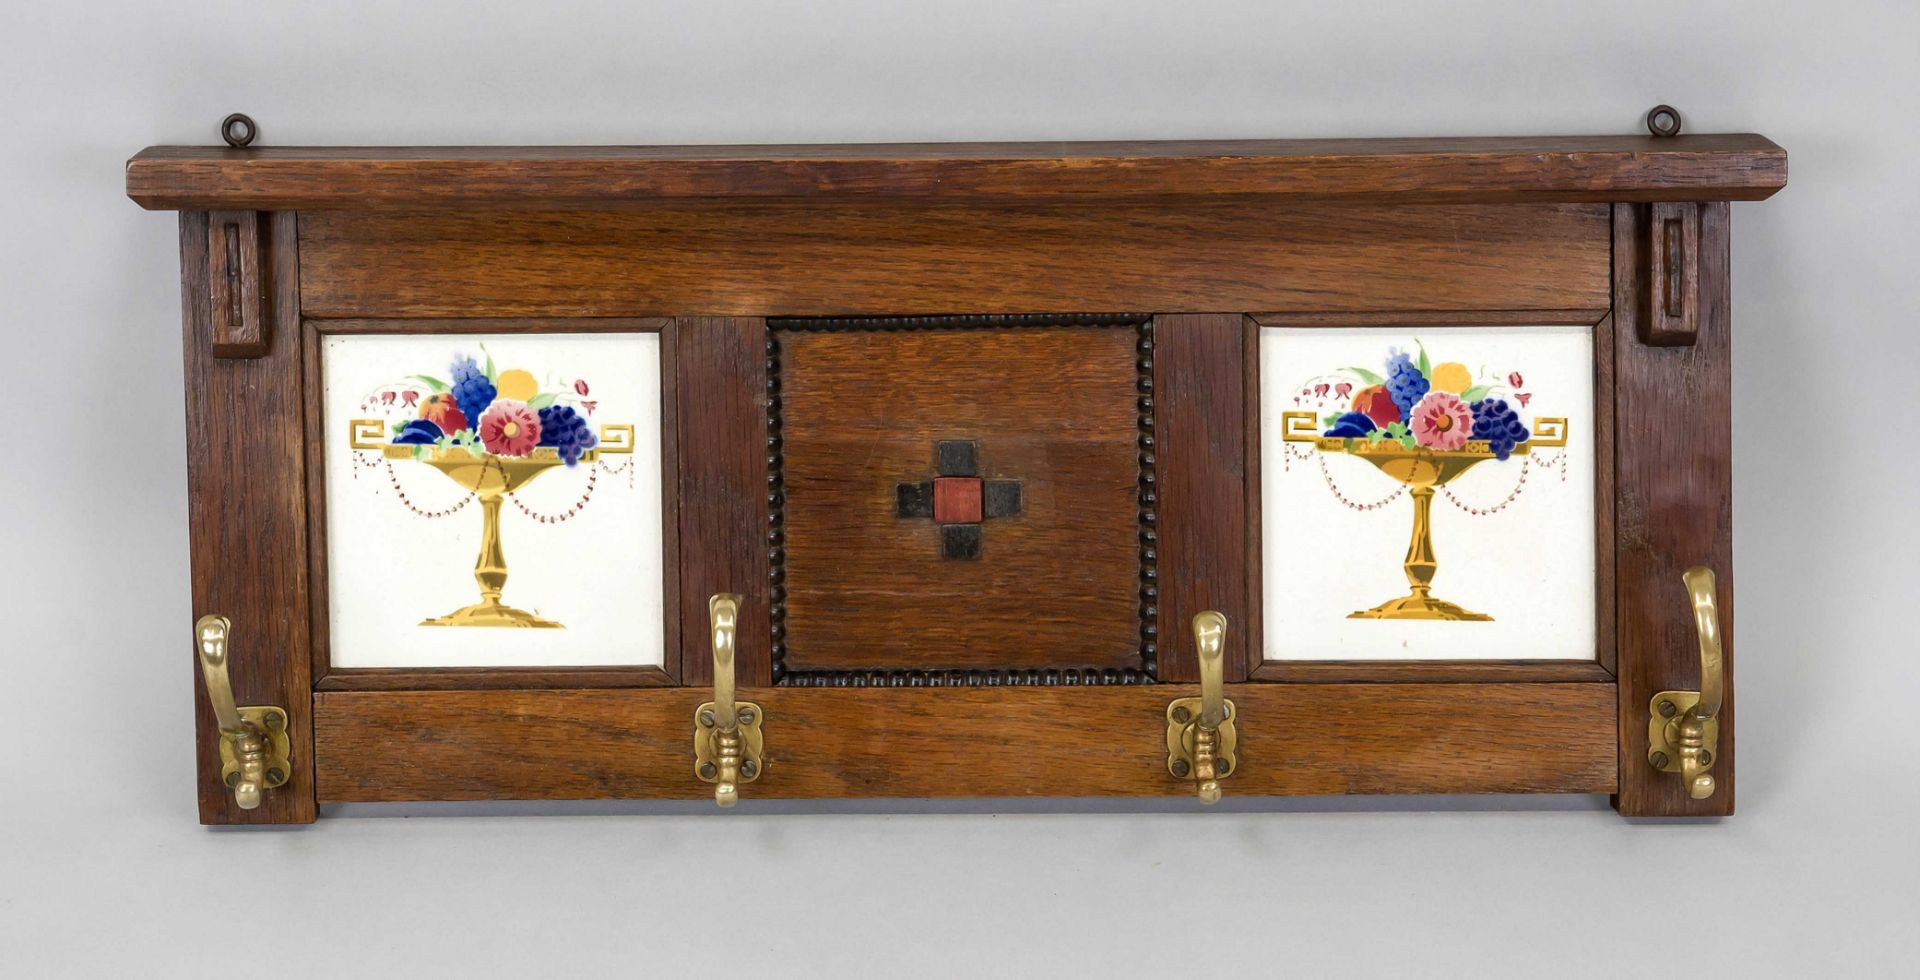 Small wall coat rack, c. 1900, architecturally designed oak plinth with tiles with sprayed